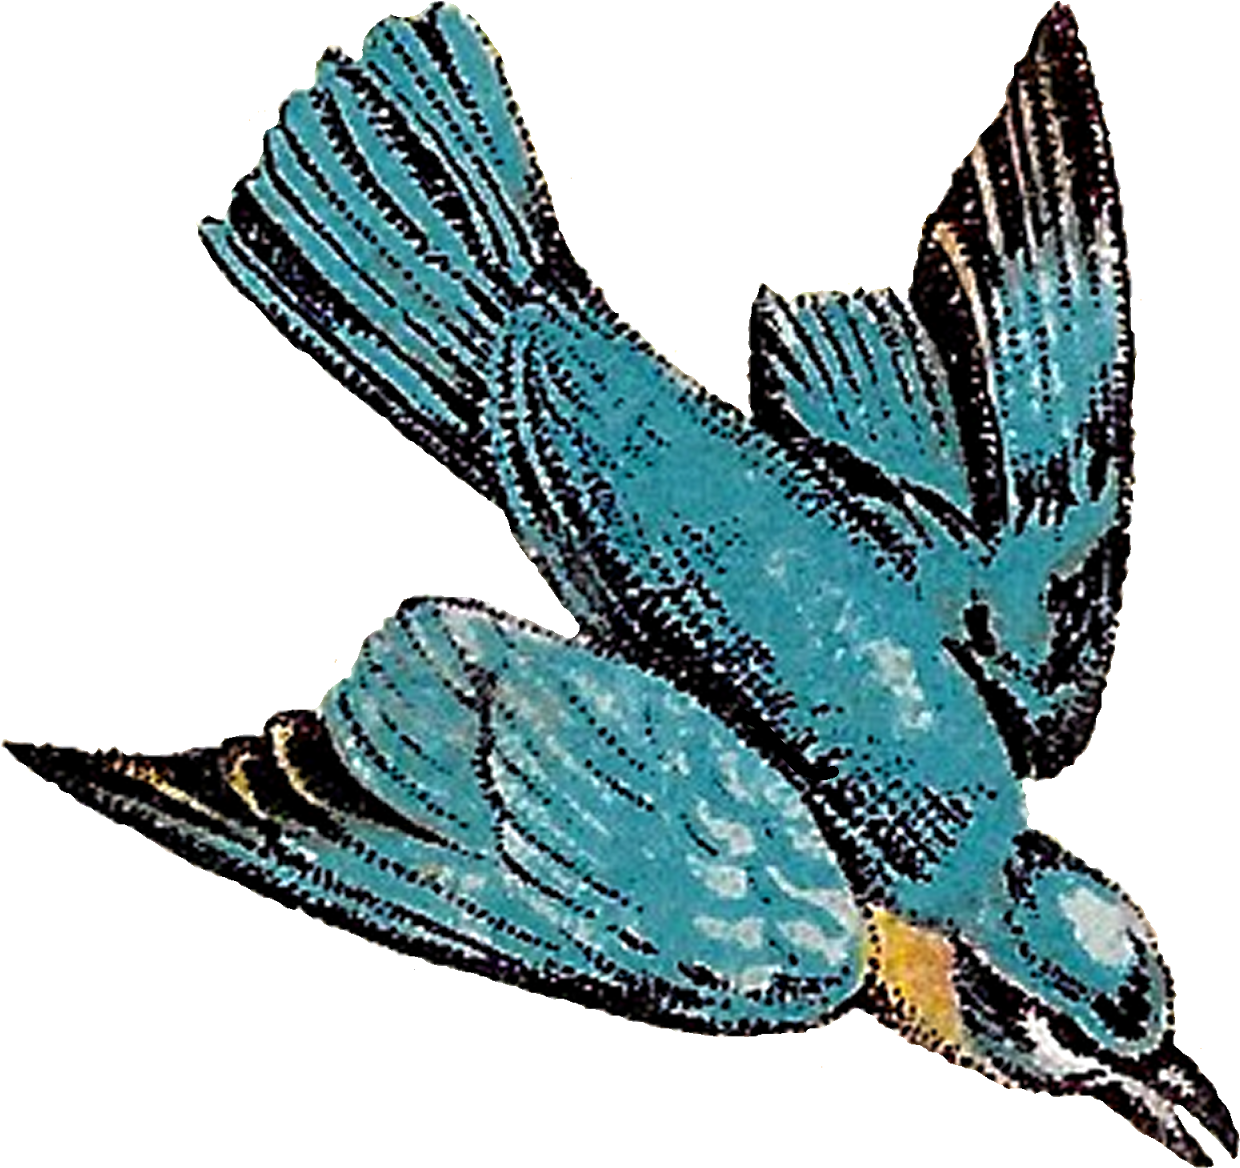 This Vintage Bird Drawing Artwork Is Very Pretty, Showing - Flying Bird Antique (1521x1600)